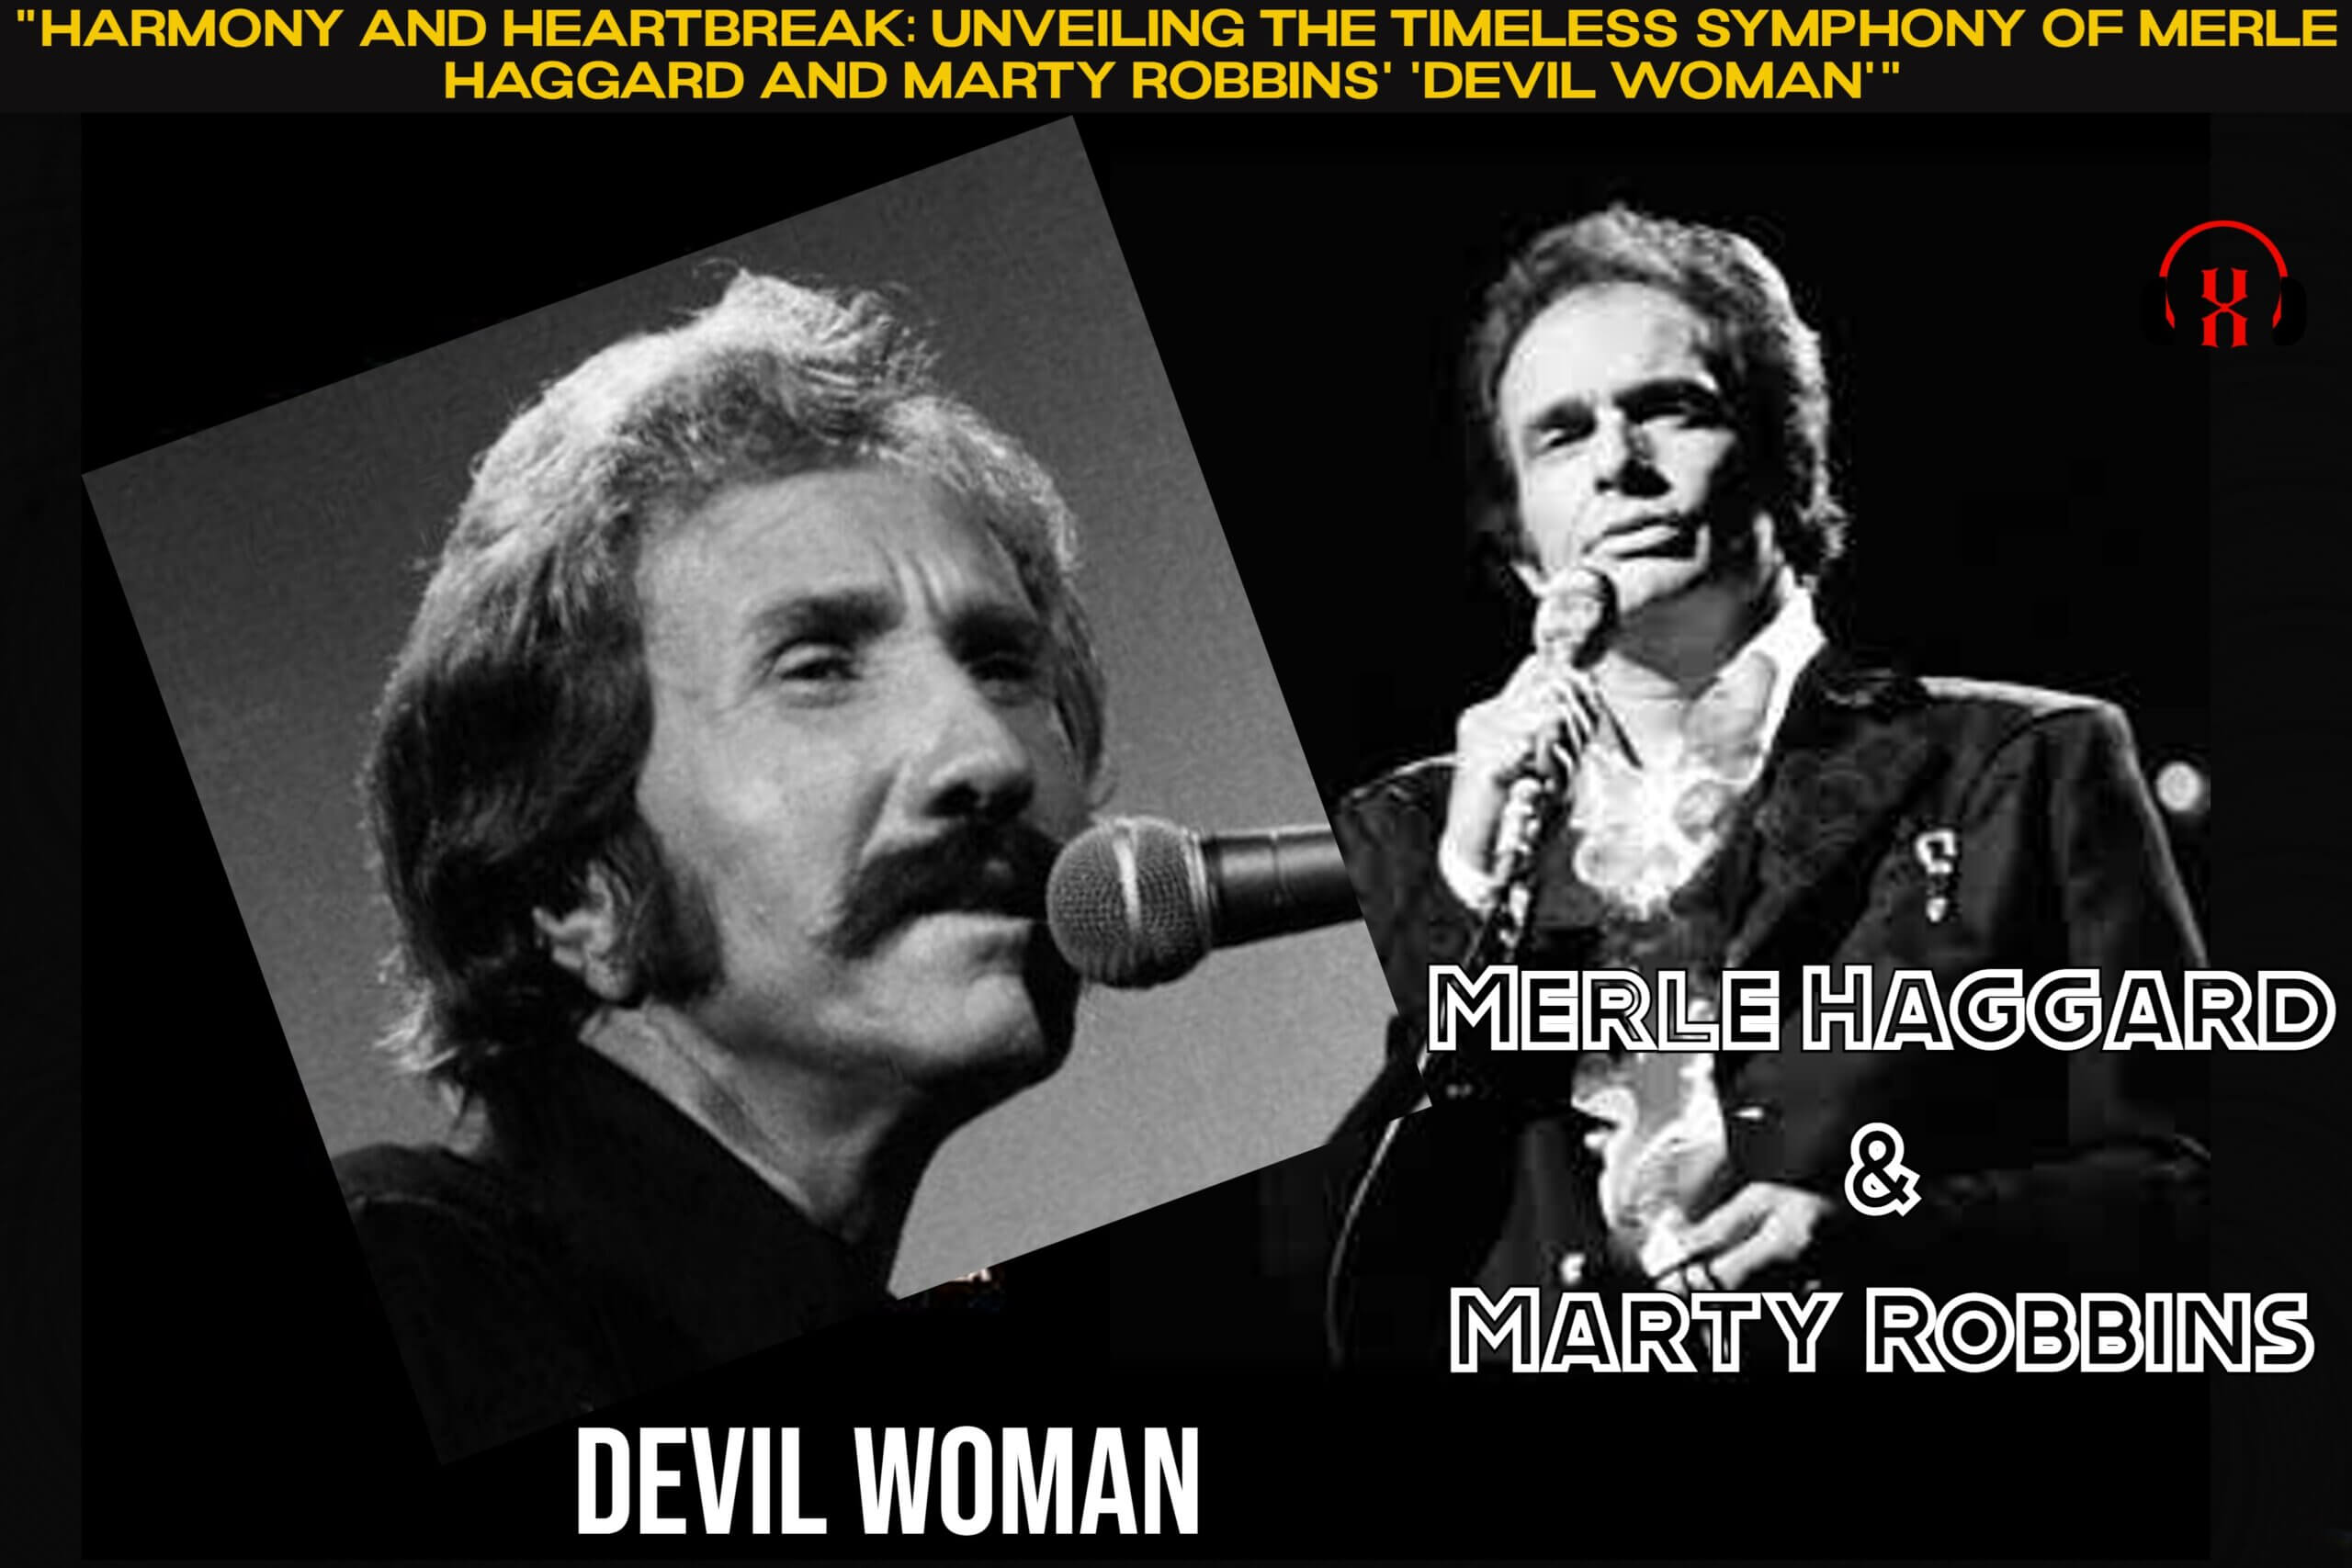 "Harmony and Heartbreak: Unveiling the Timeless Symphony of Merle Haggard and Marty Robbins' 'Devil Woman'"